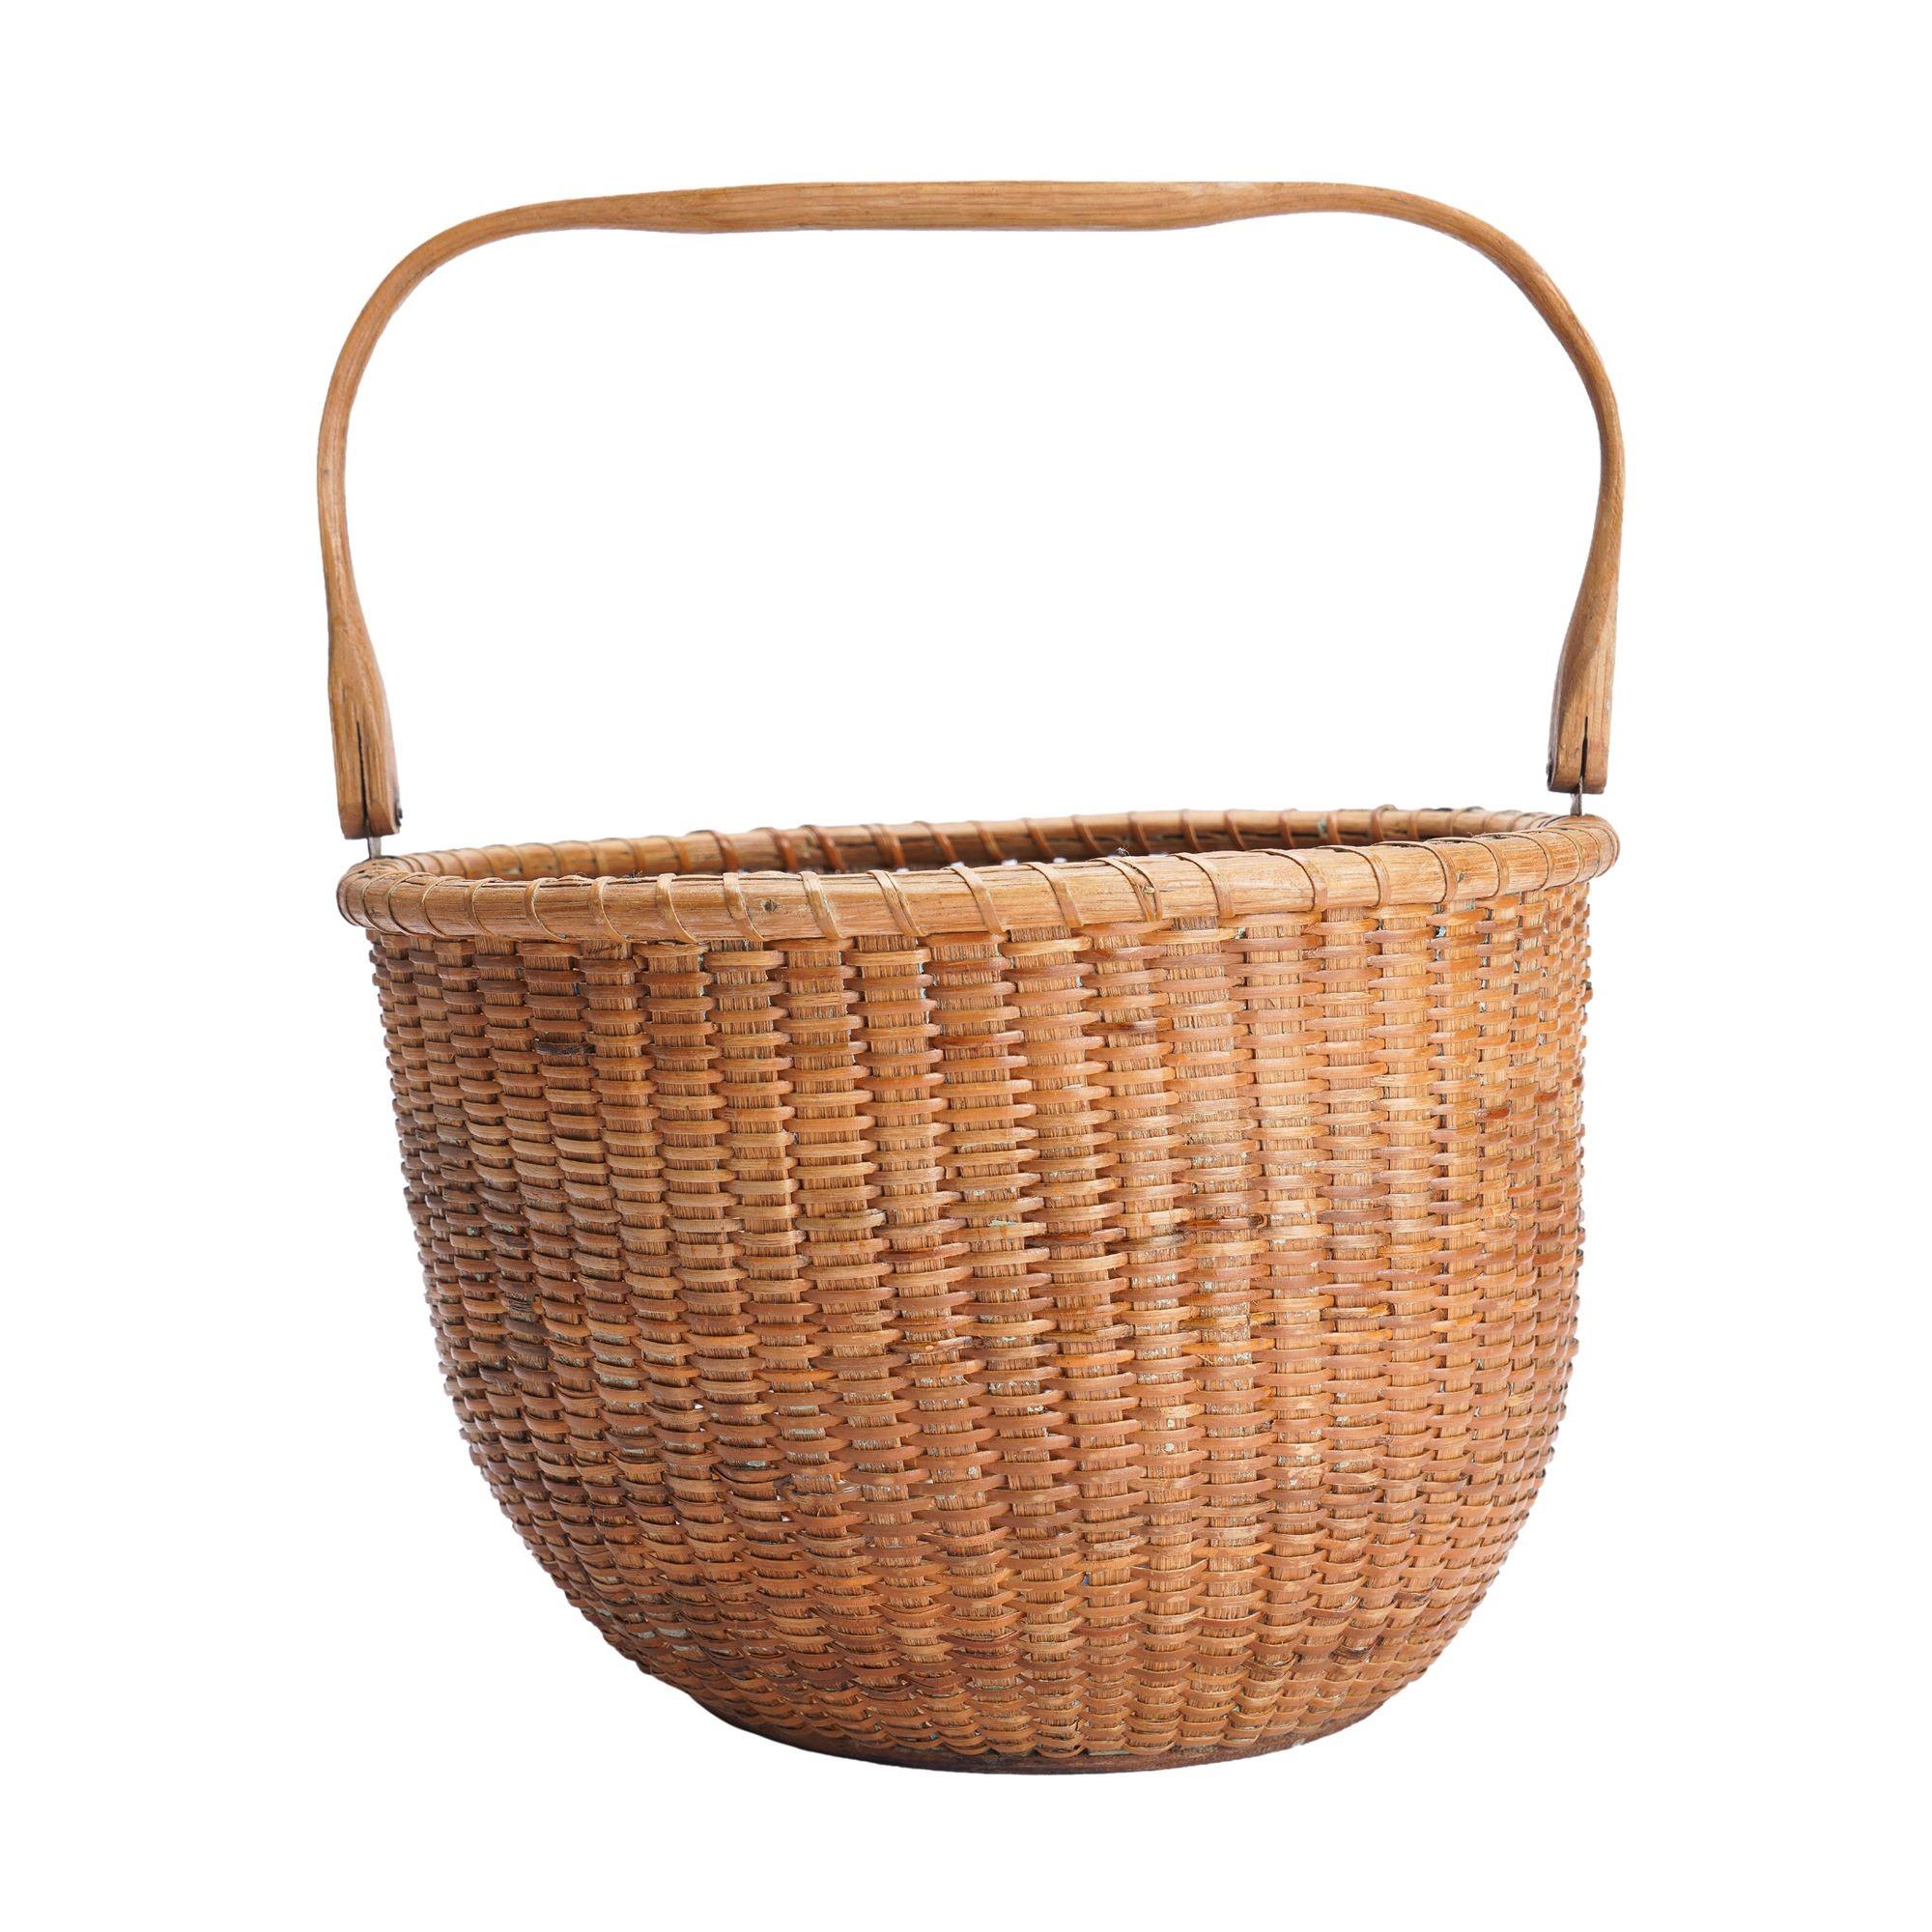 Nantucket lighthouse basket attributed to Mitchy Ray, 1900-50 For Sale 3